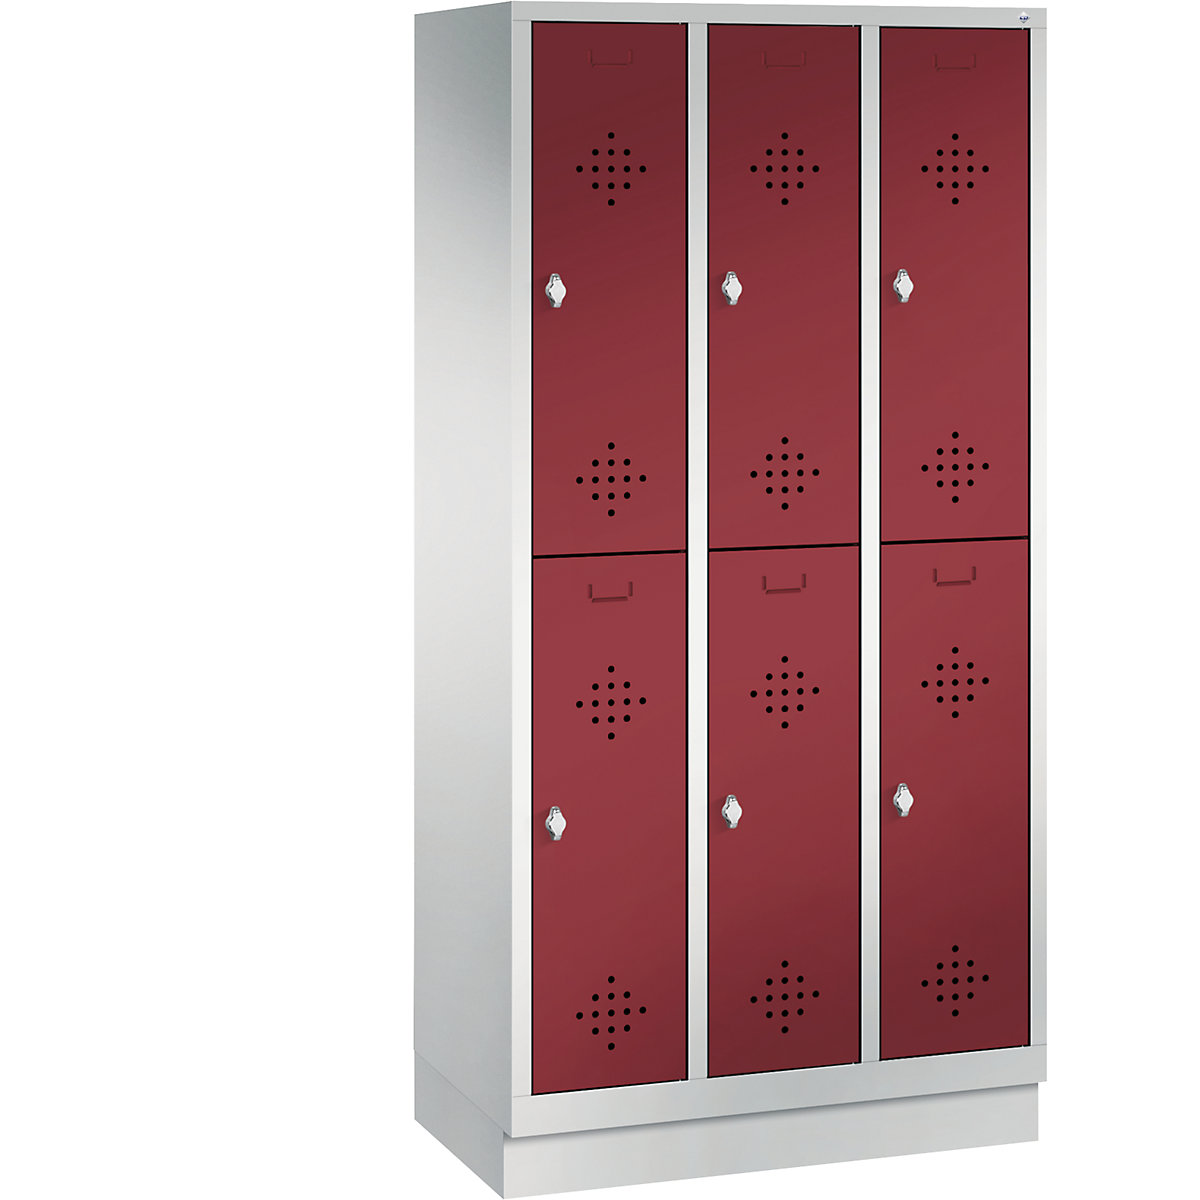 CLASSIC cloakroom locker with plinth, double tier – C+P, 3 compartments, 2 shelf compartments each, compartment width 300 mm, light grey / ruby red-13